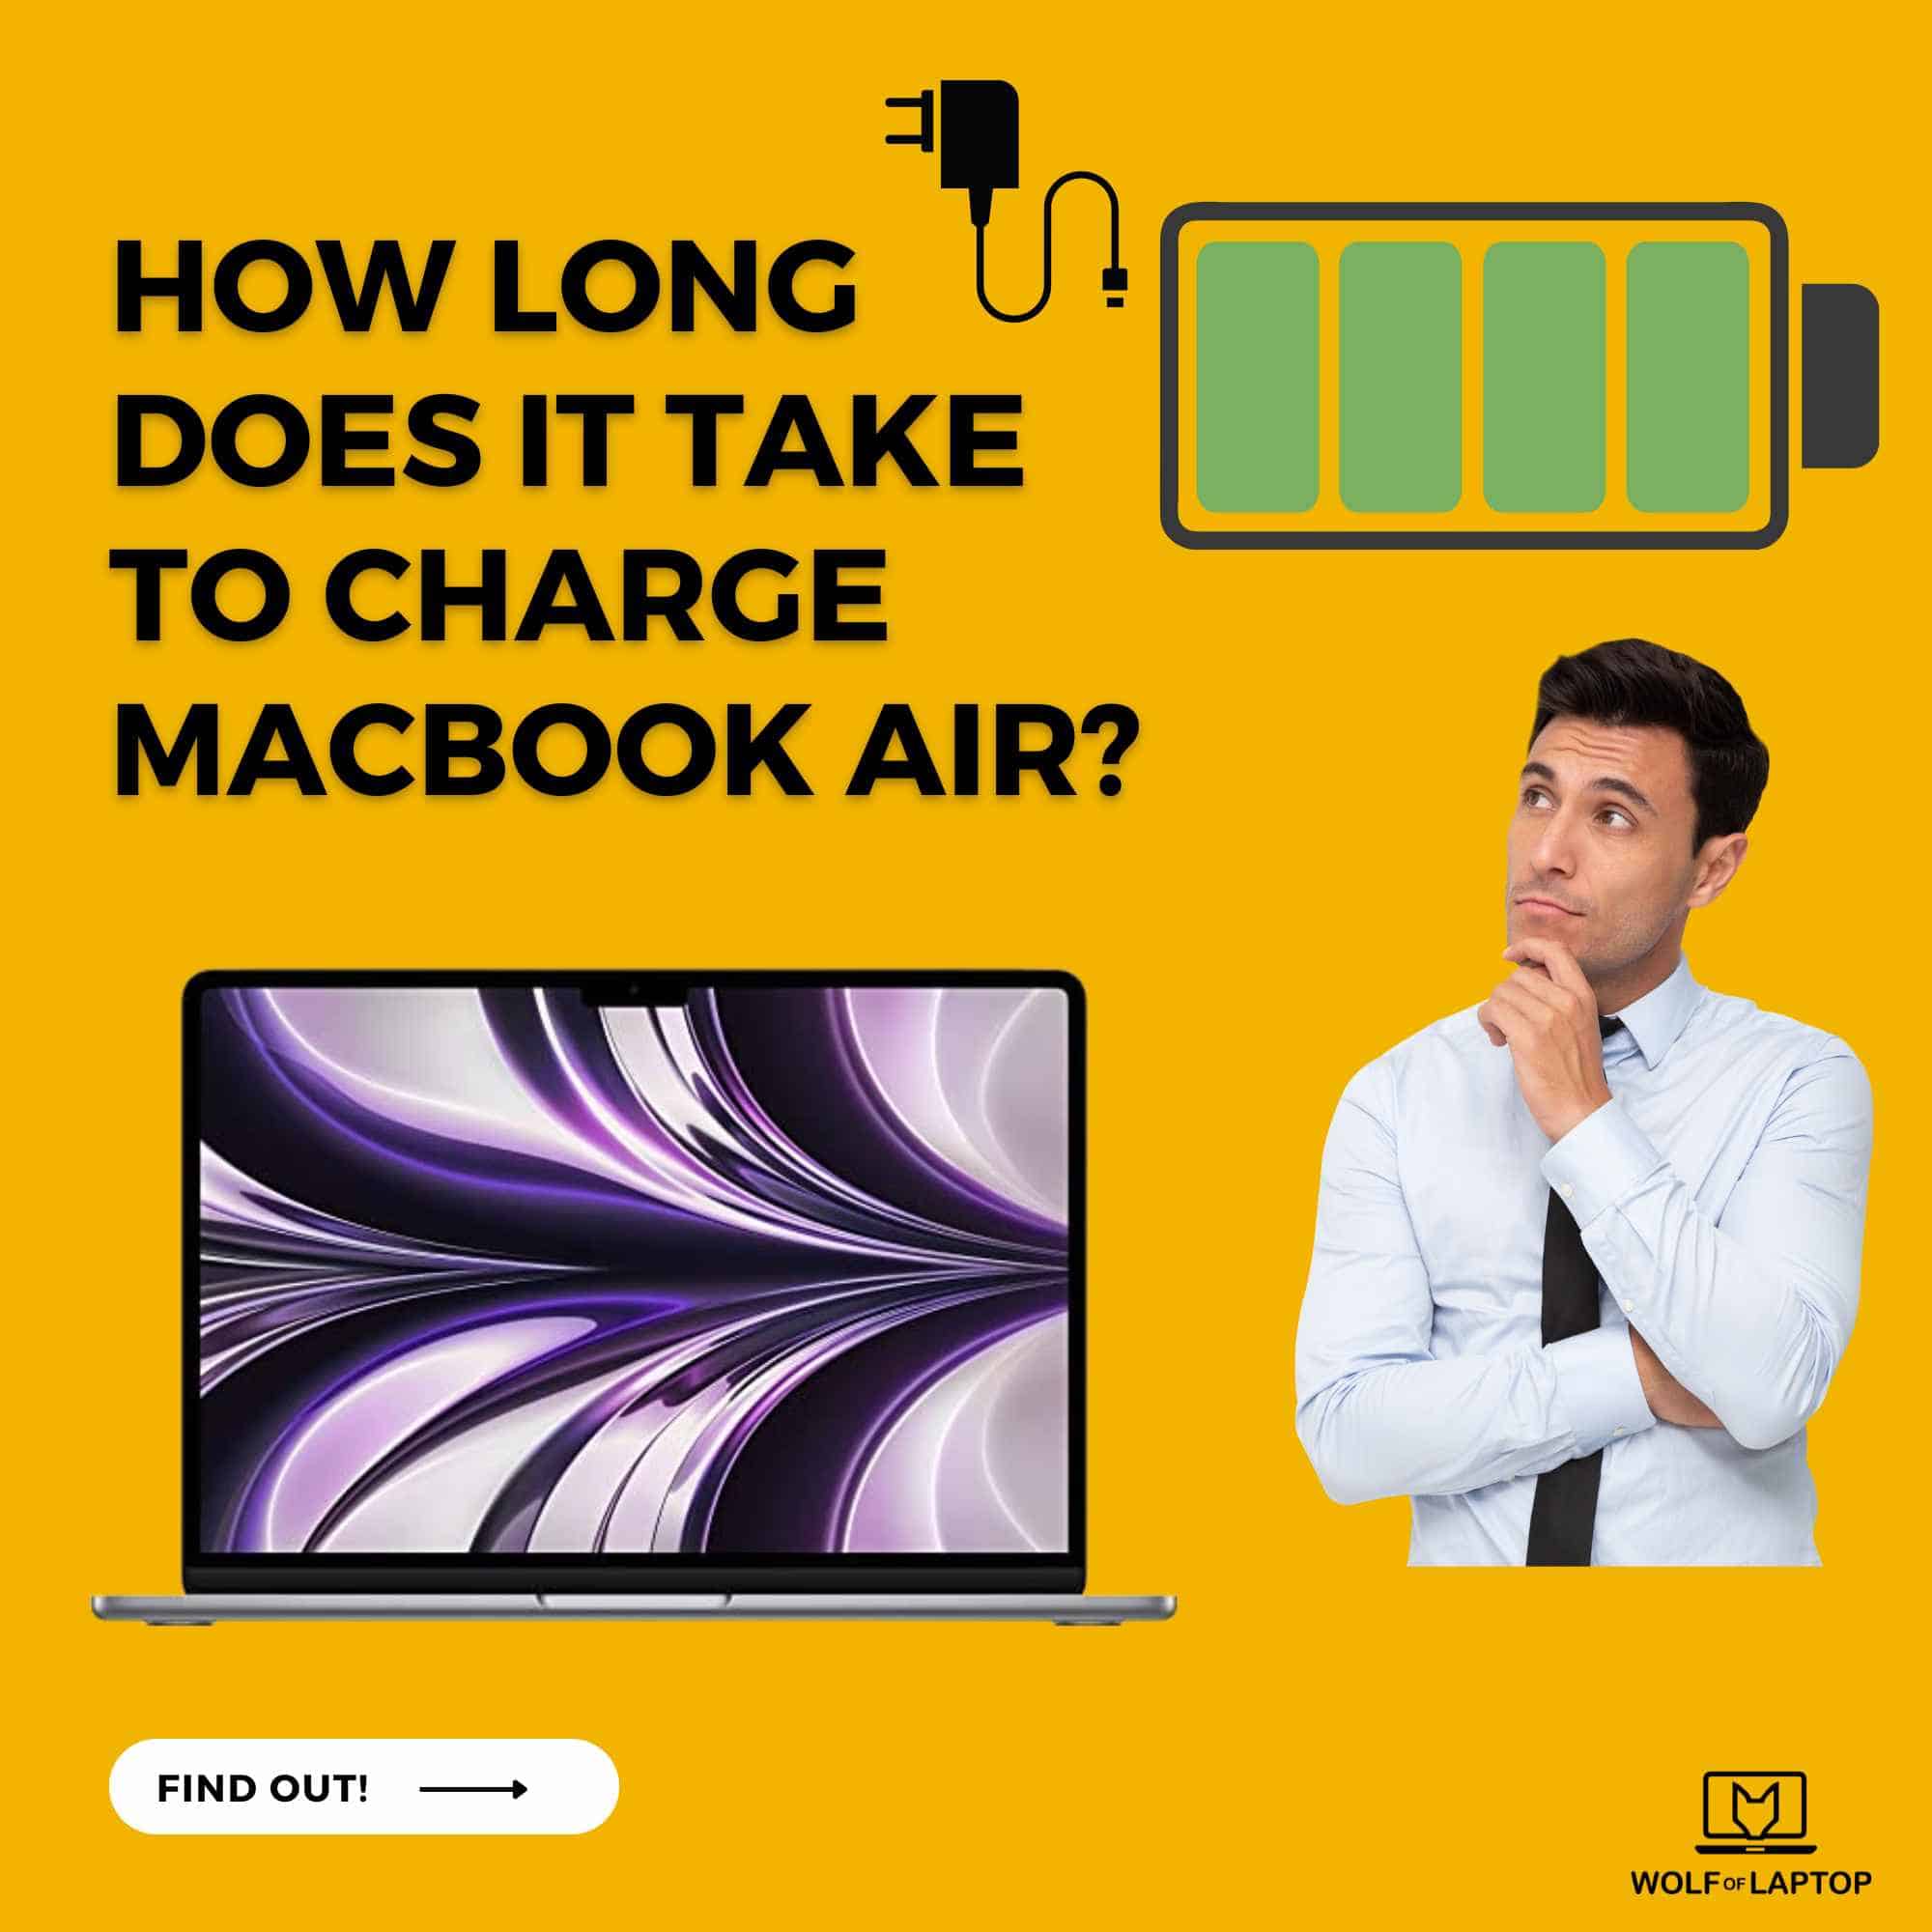 macbook air charging time - how long it takes? answered